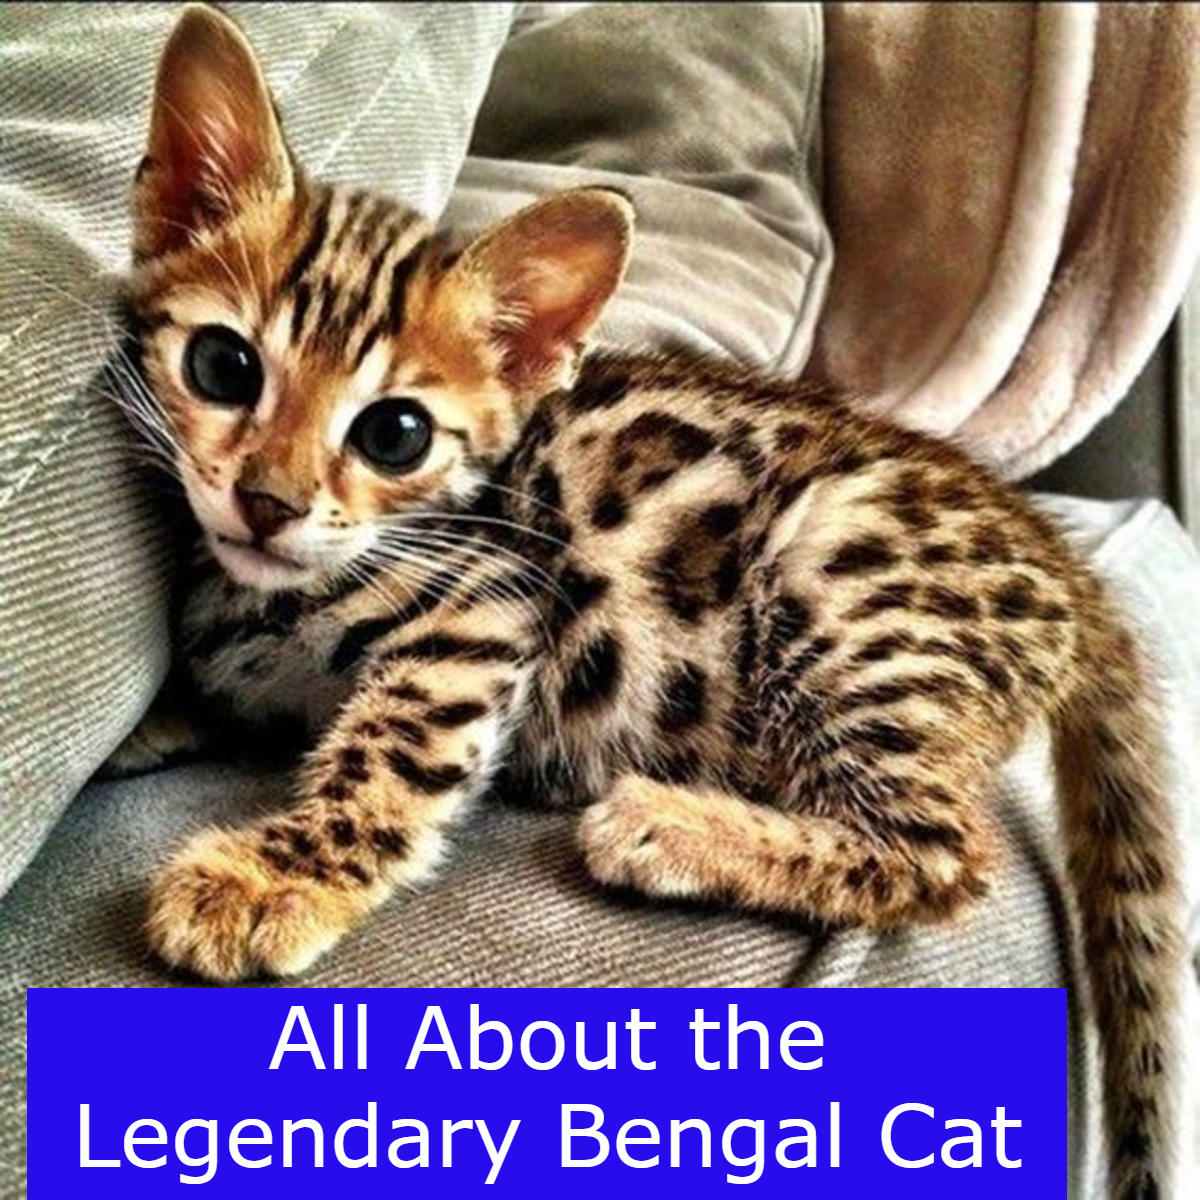 A baby Bengal—Bengal kittens are adorable!